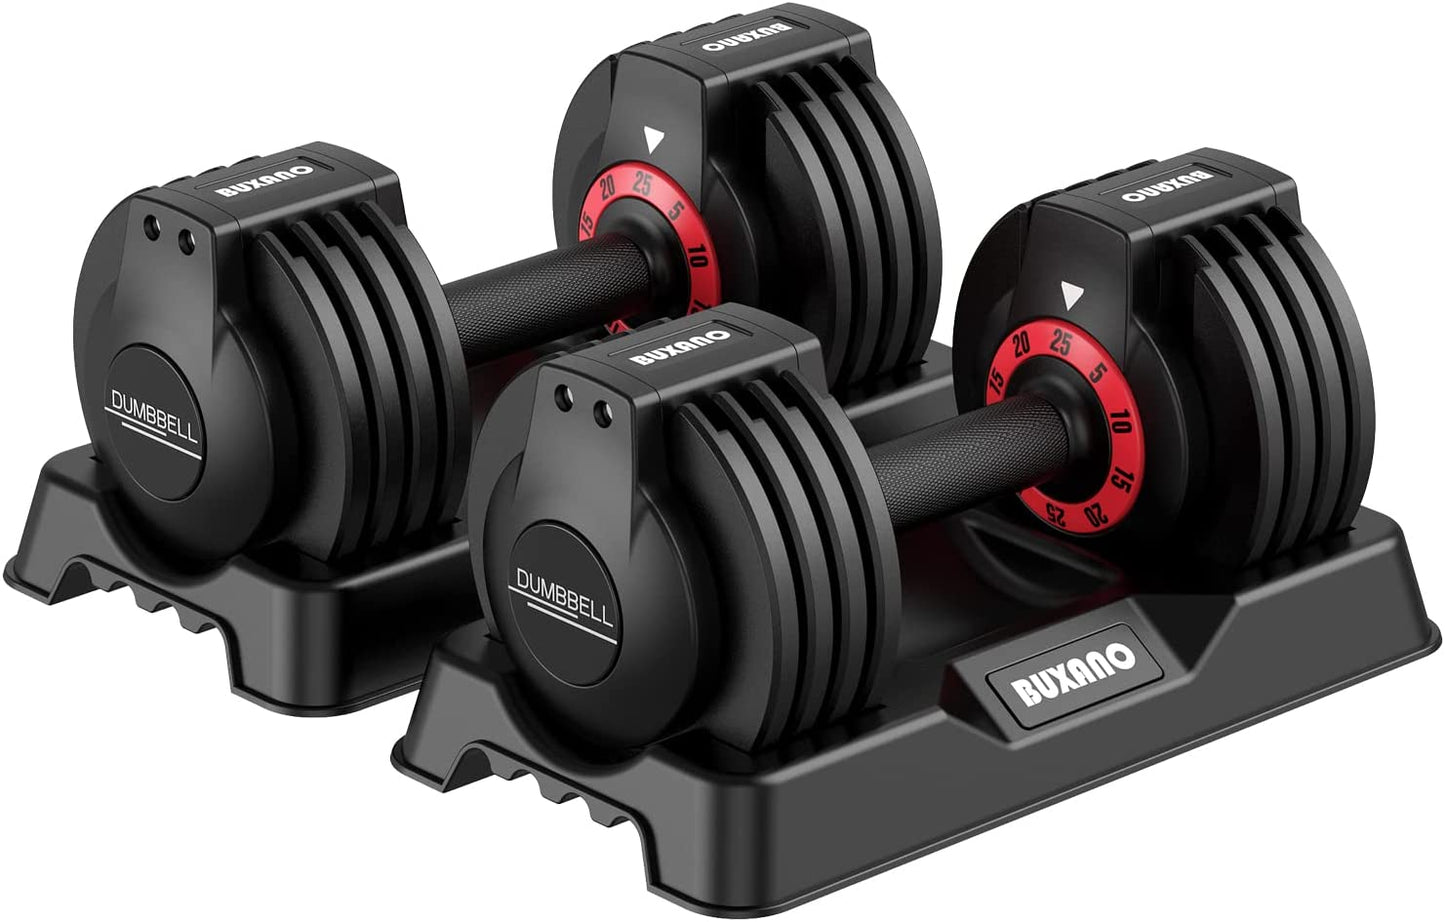 Adjustable Dumbbell 25/55LB 5 in 1 Single Dumbbell for Men and Women Multiweight Options Dumbbell with Anti-Slip Nylon Handle Fast Adjust Weight for Home Gym Full Body Workout Fitness